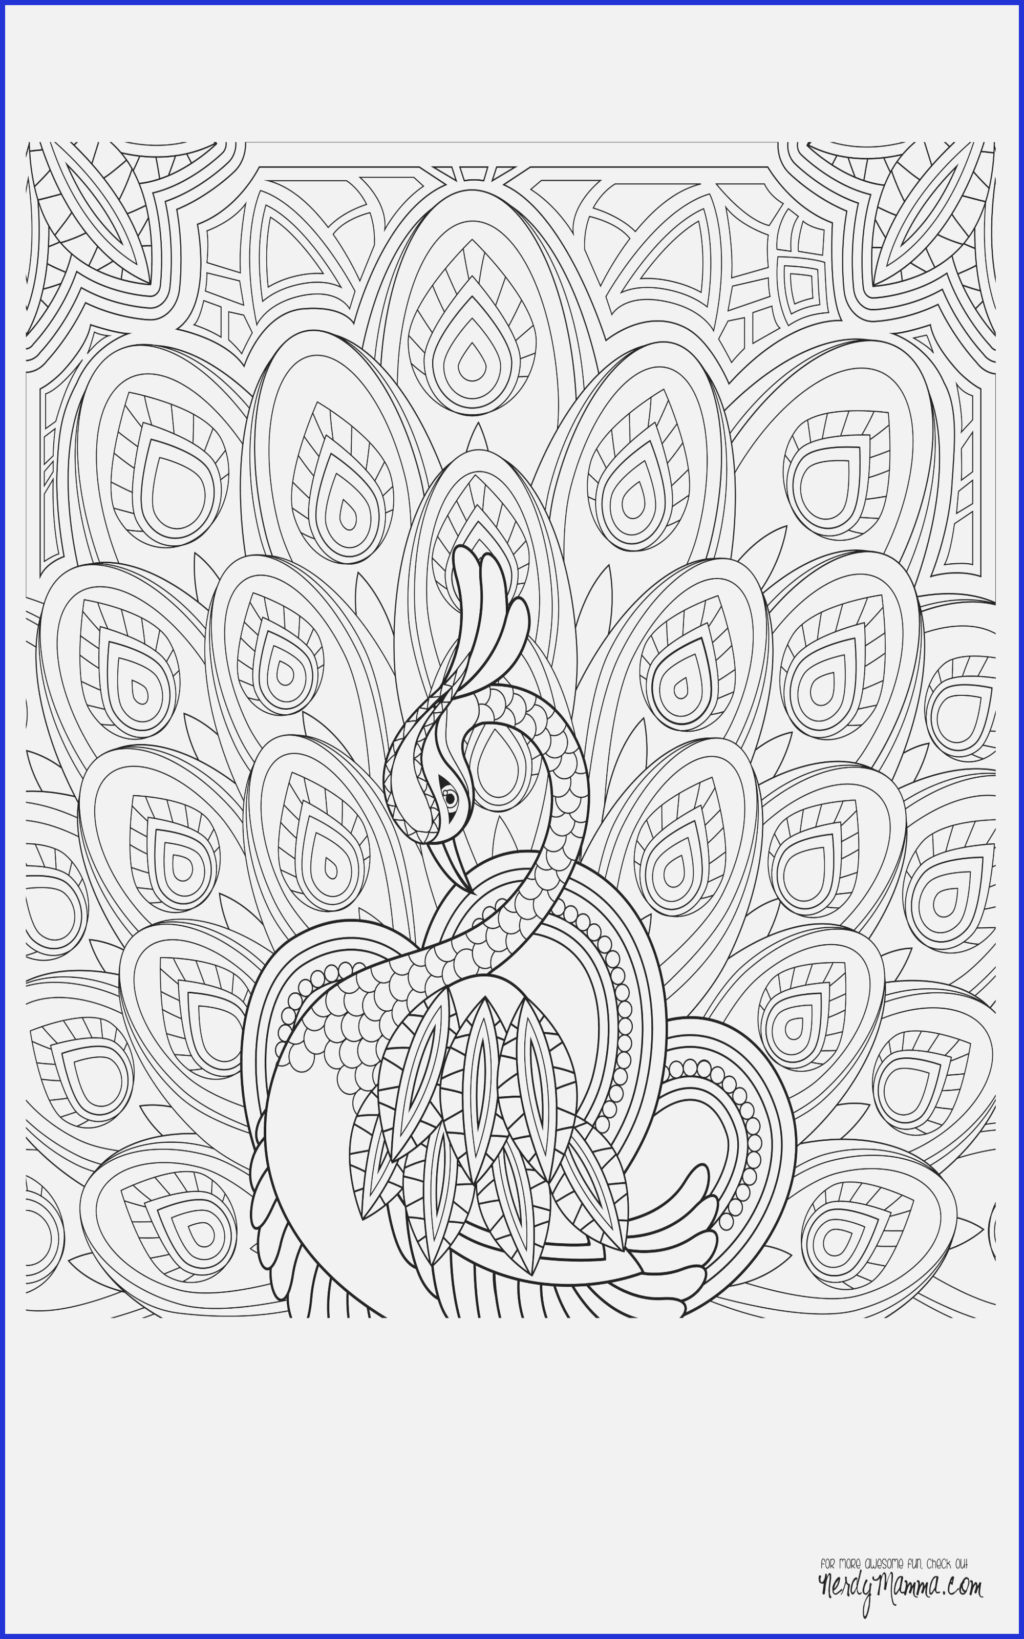 Interactive Coloring Pages Coloring Books Coloring Videoe Pages Redgrillo Com Attachment